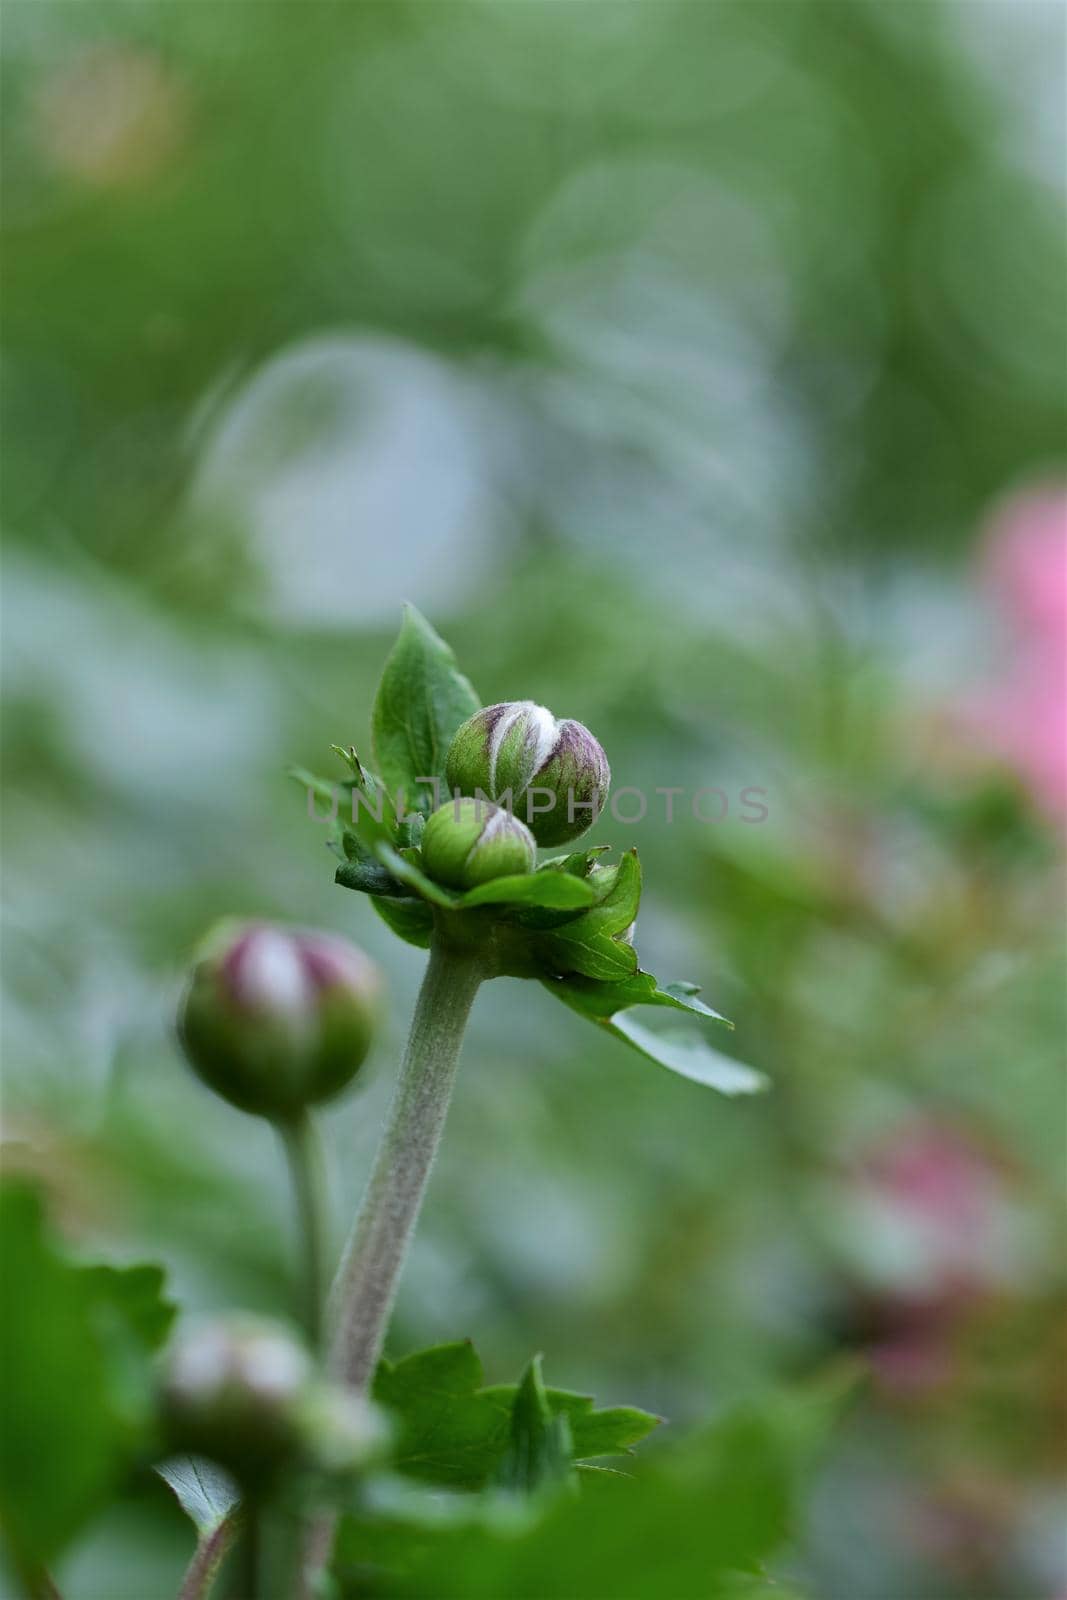 Autumn anemone buds as a close up by Luise123